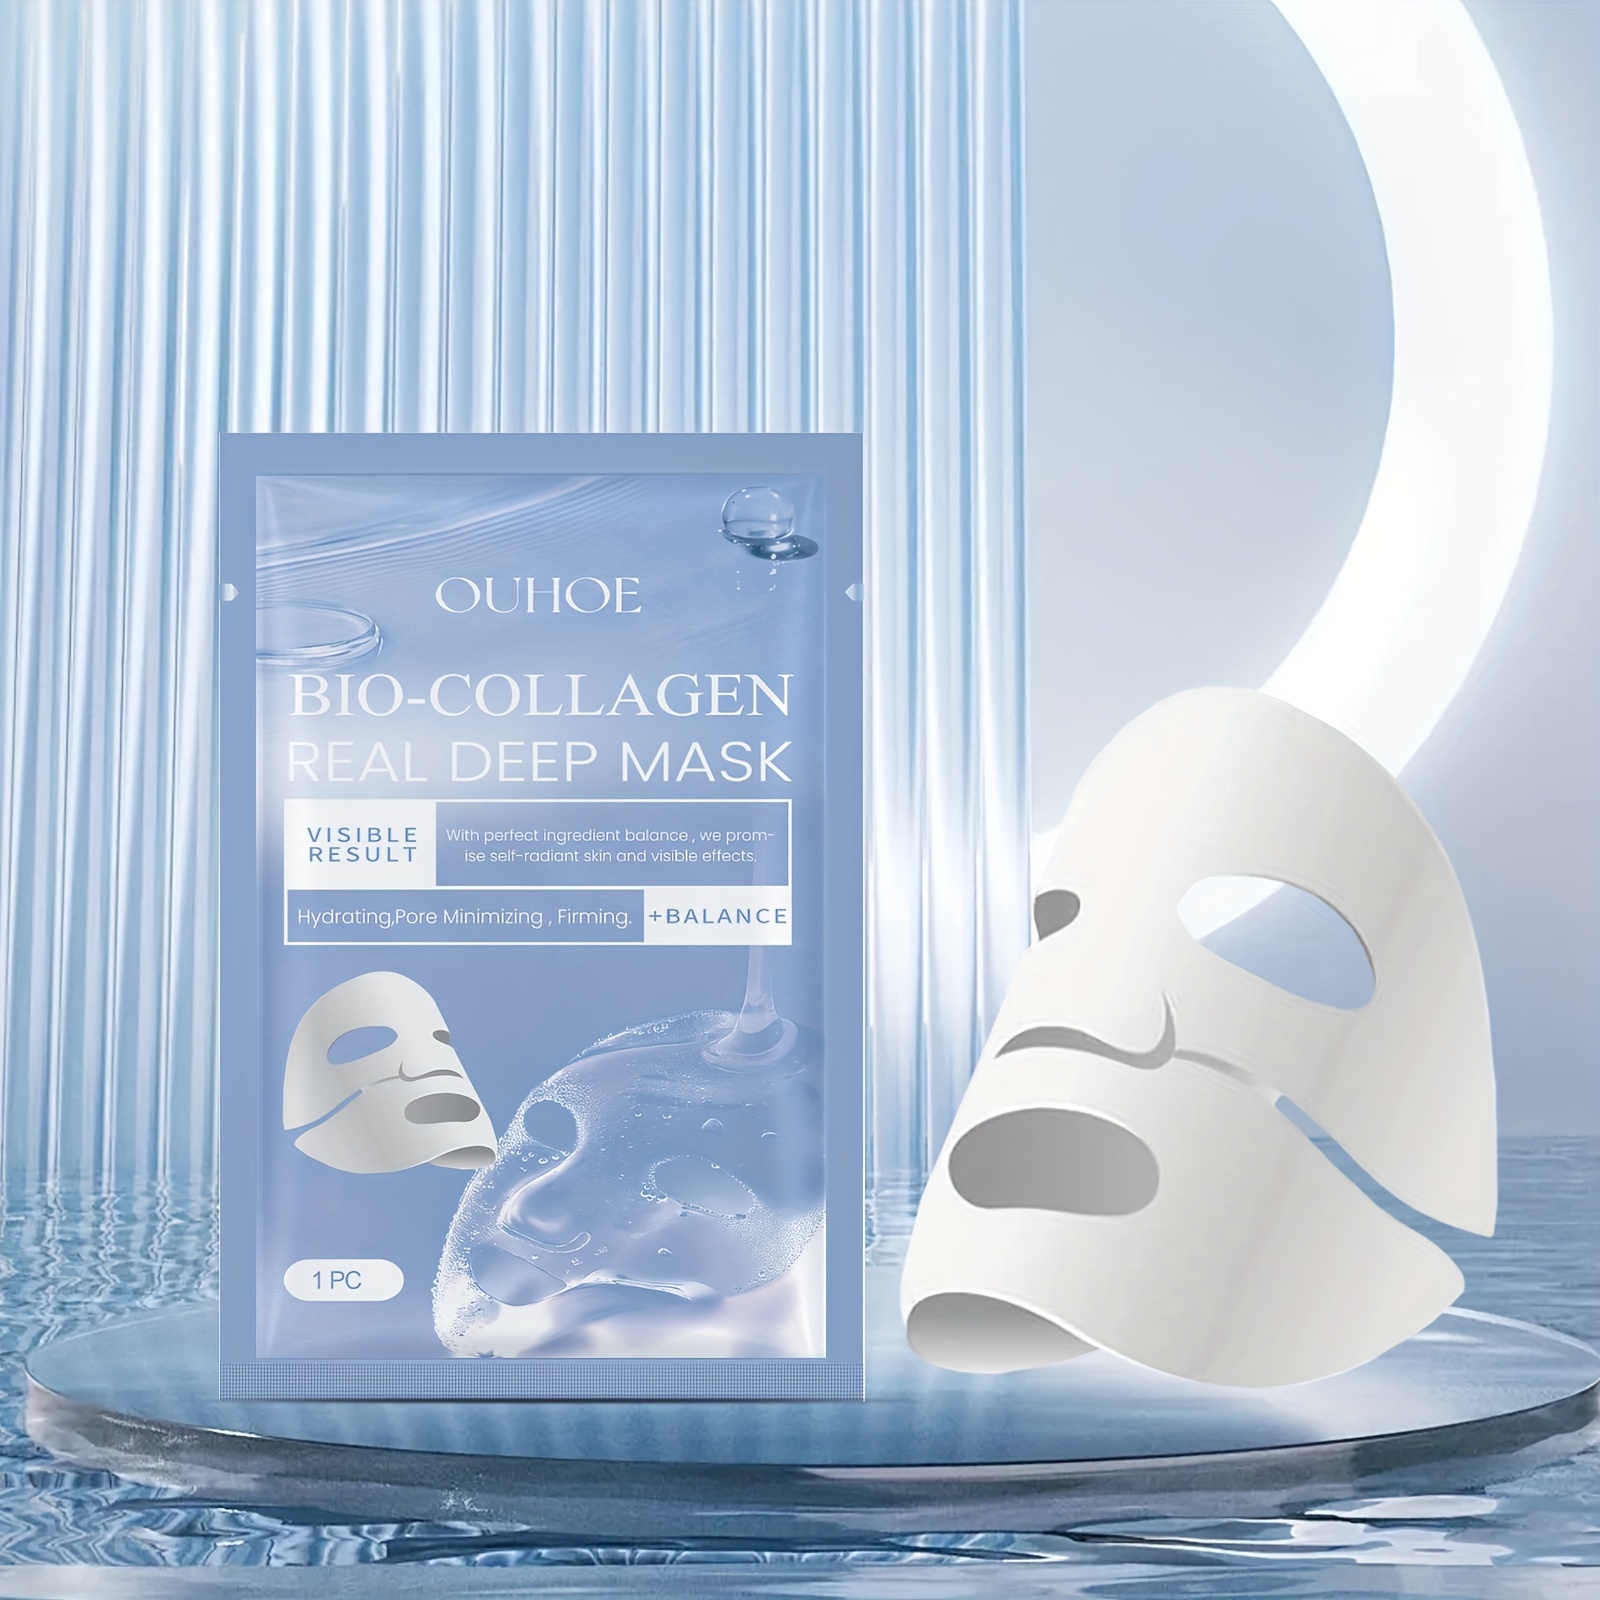 

Hydrating Collagen Face Mask - Enriched With Hyaluronic Acid, Niacinamide & Yeast Extract For All Skin Types | Alcohol-free, Fragrance-free | Firms & Moisturizes | Travel Size